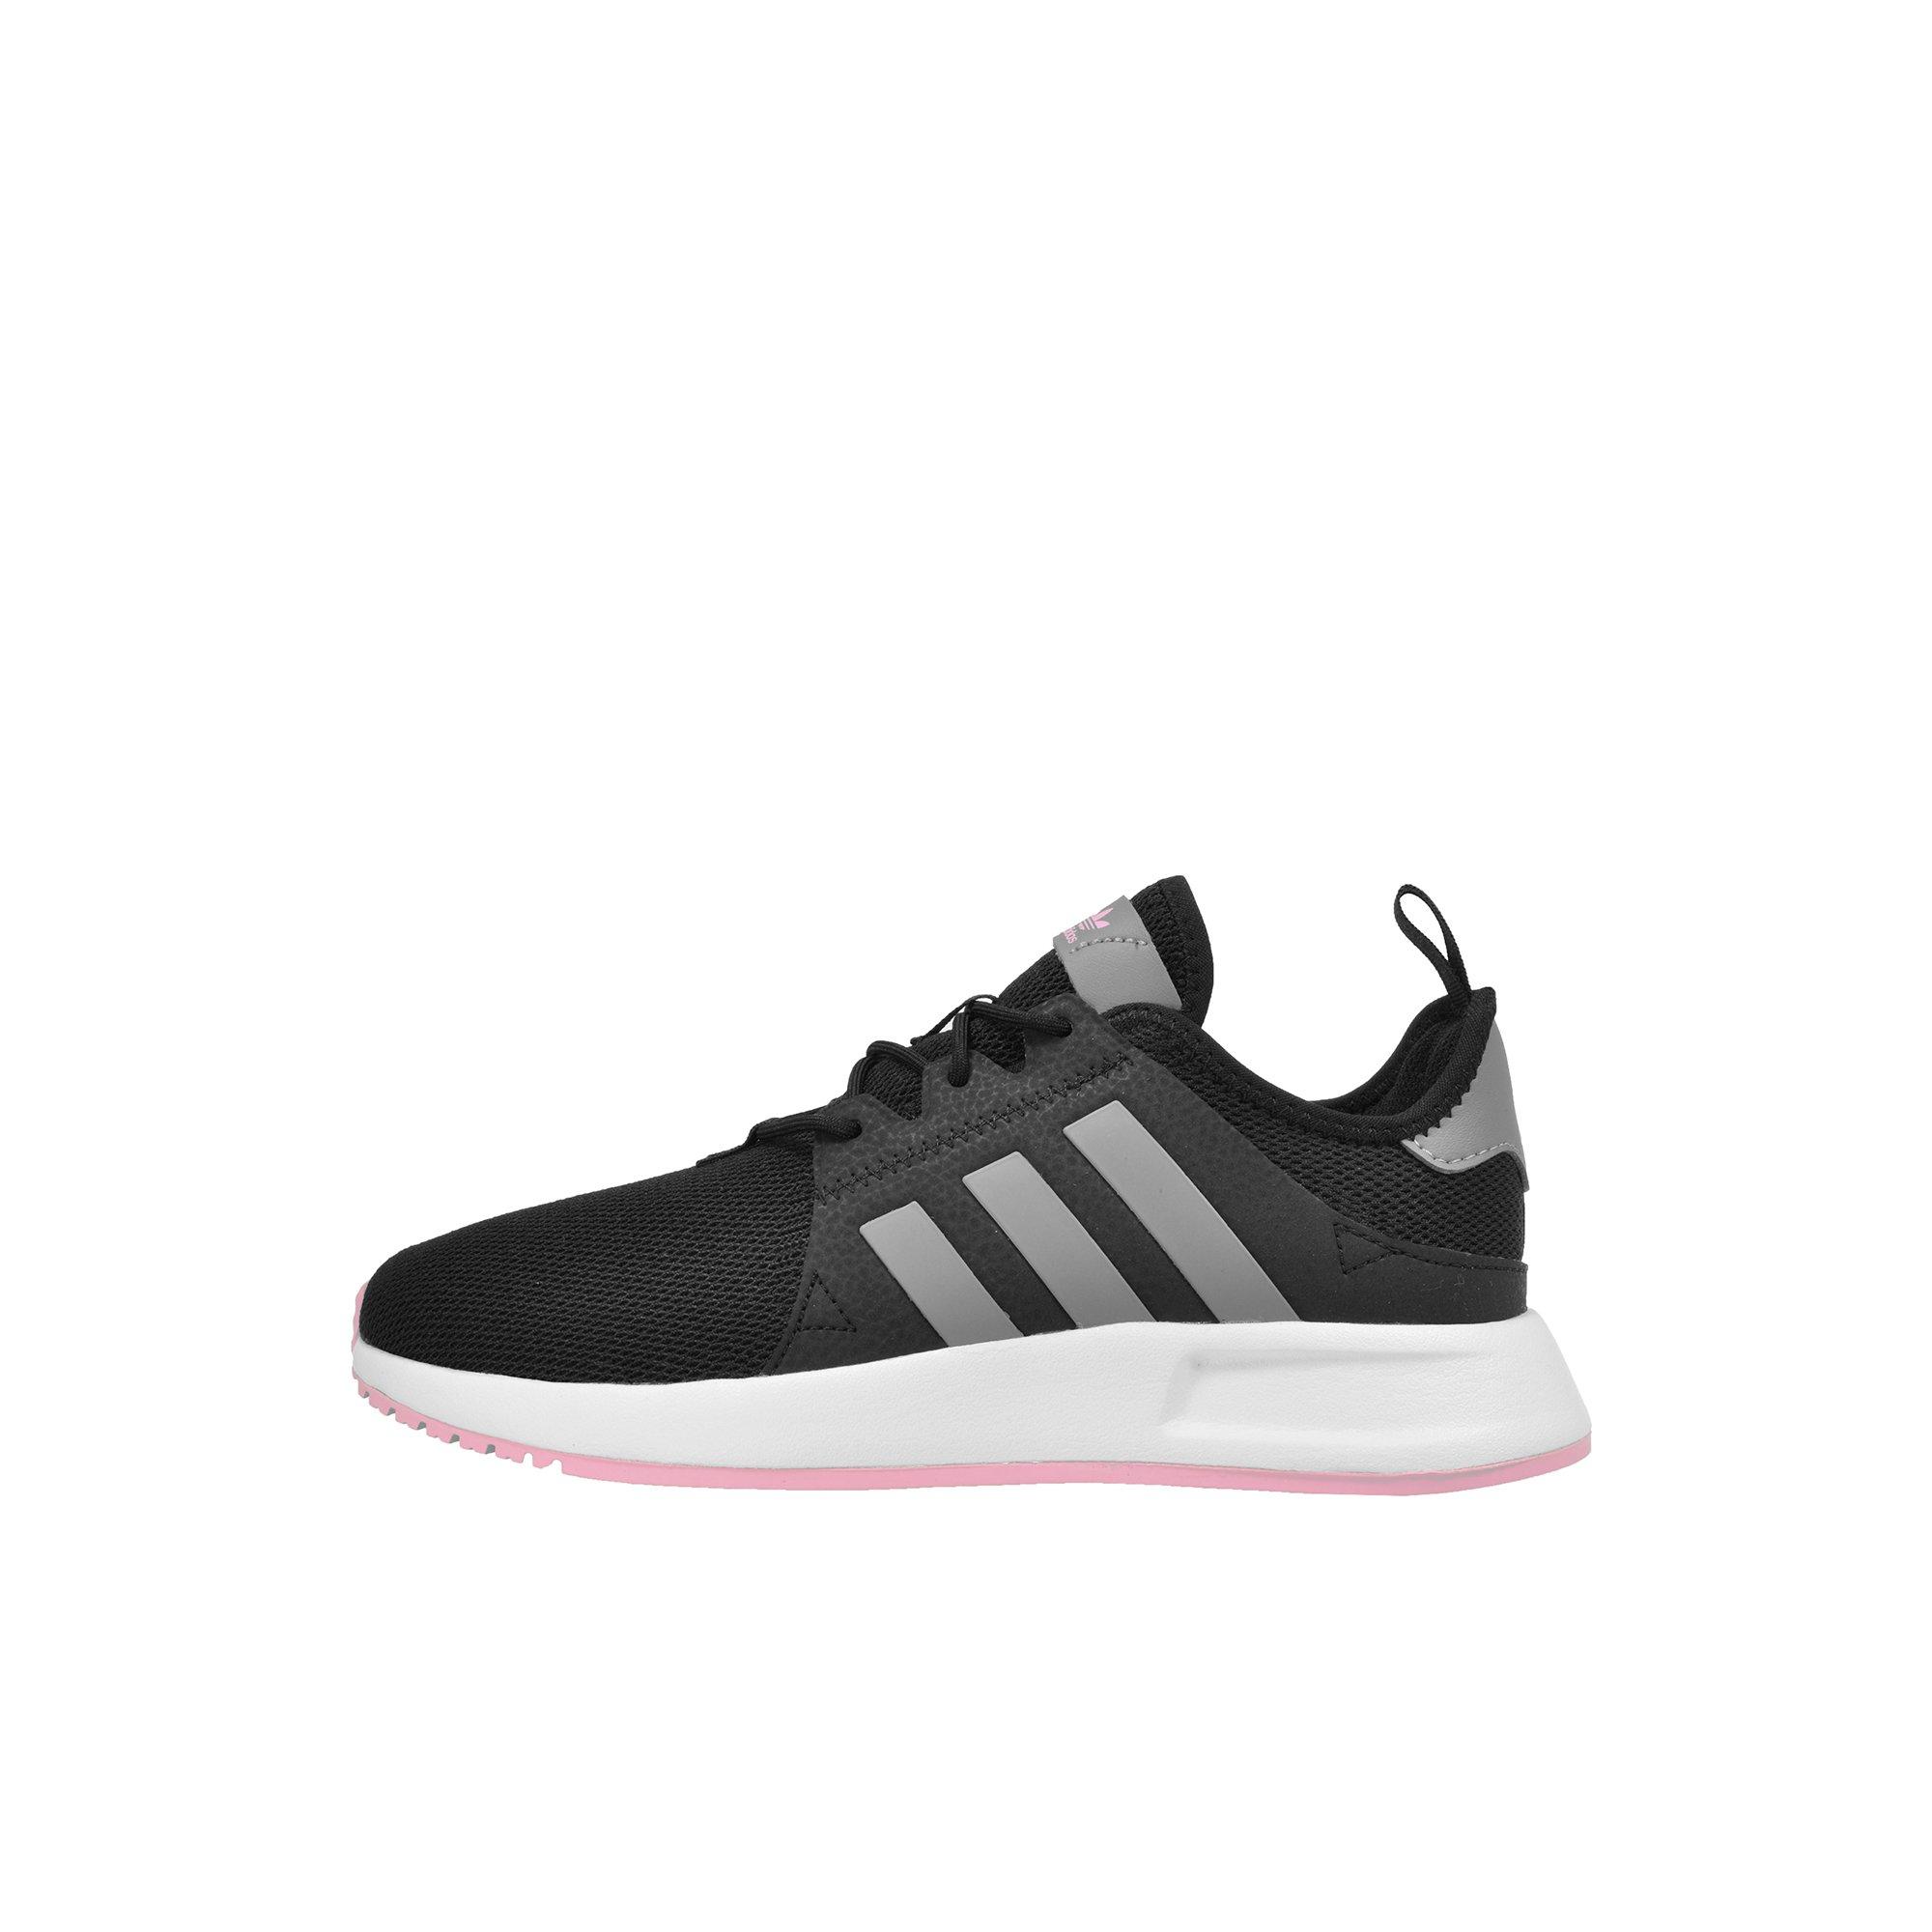 adidas takkies for toddlers